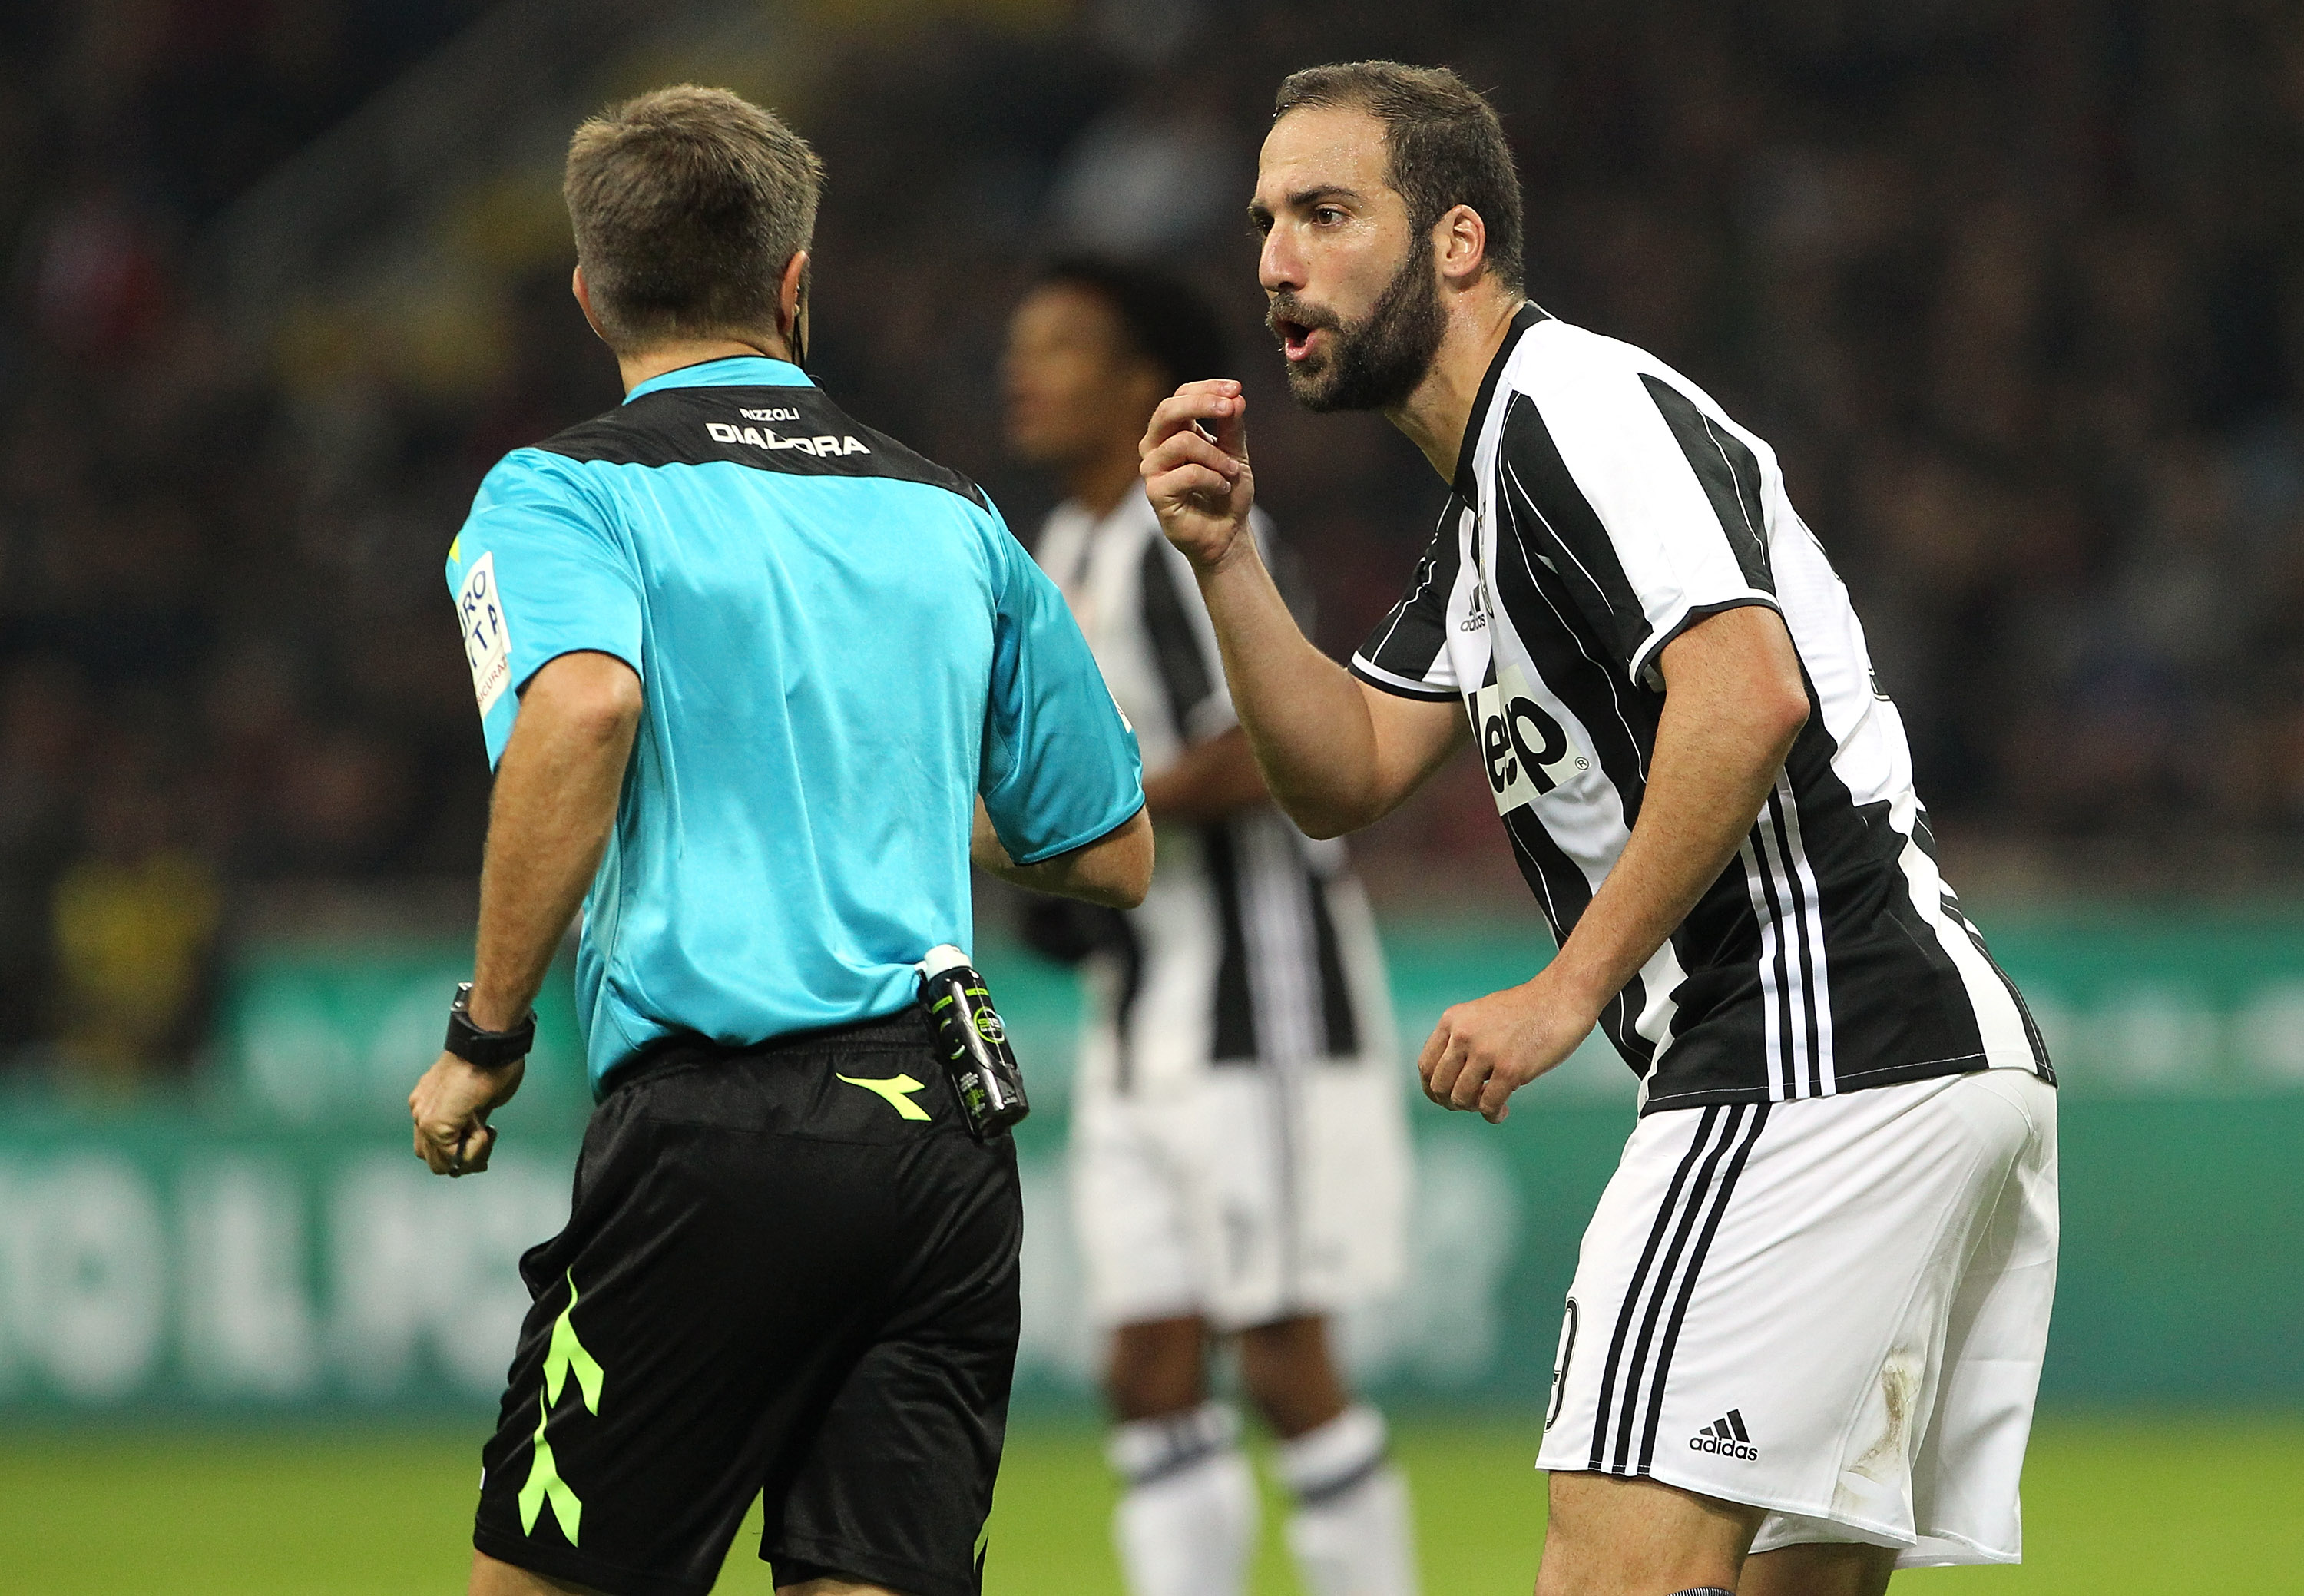 MILAN, ITALY - OCTOBER 22: Gonzalo Higuain (R) of Juventus FC disputes with Referee Nicola Rizzoli (R) during the Serie A match between AC Milan and Juventus FC at Stadio Giuseppe Meazza on October 22, 2016 in Milan, Italy. (Photo by Marco Luzzani/Getty Images)